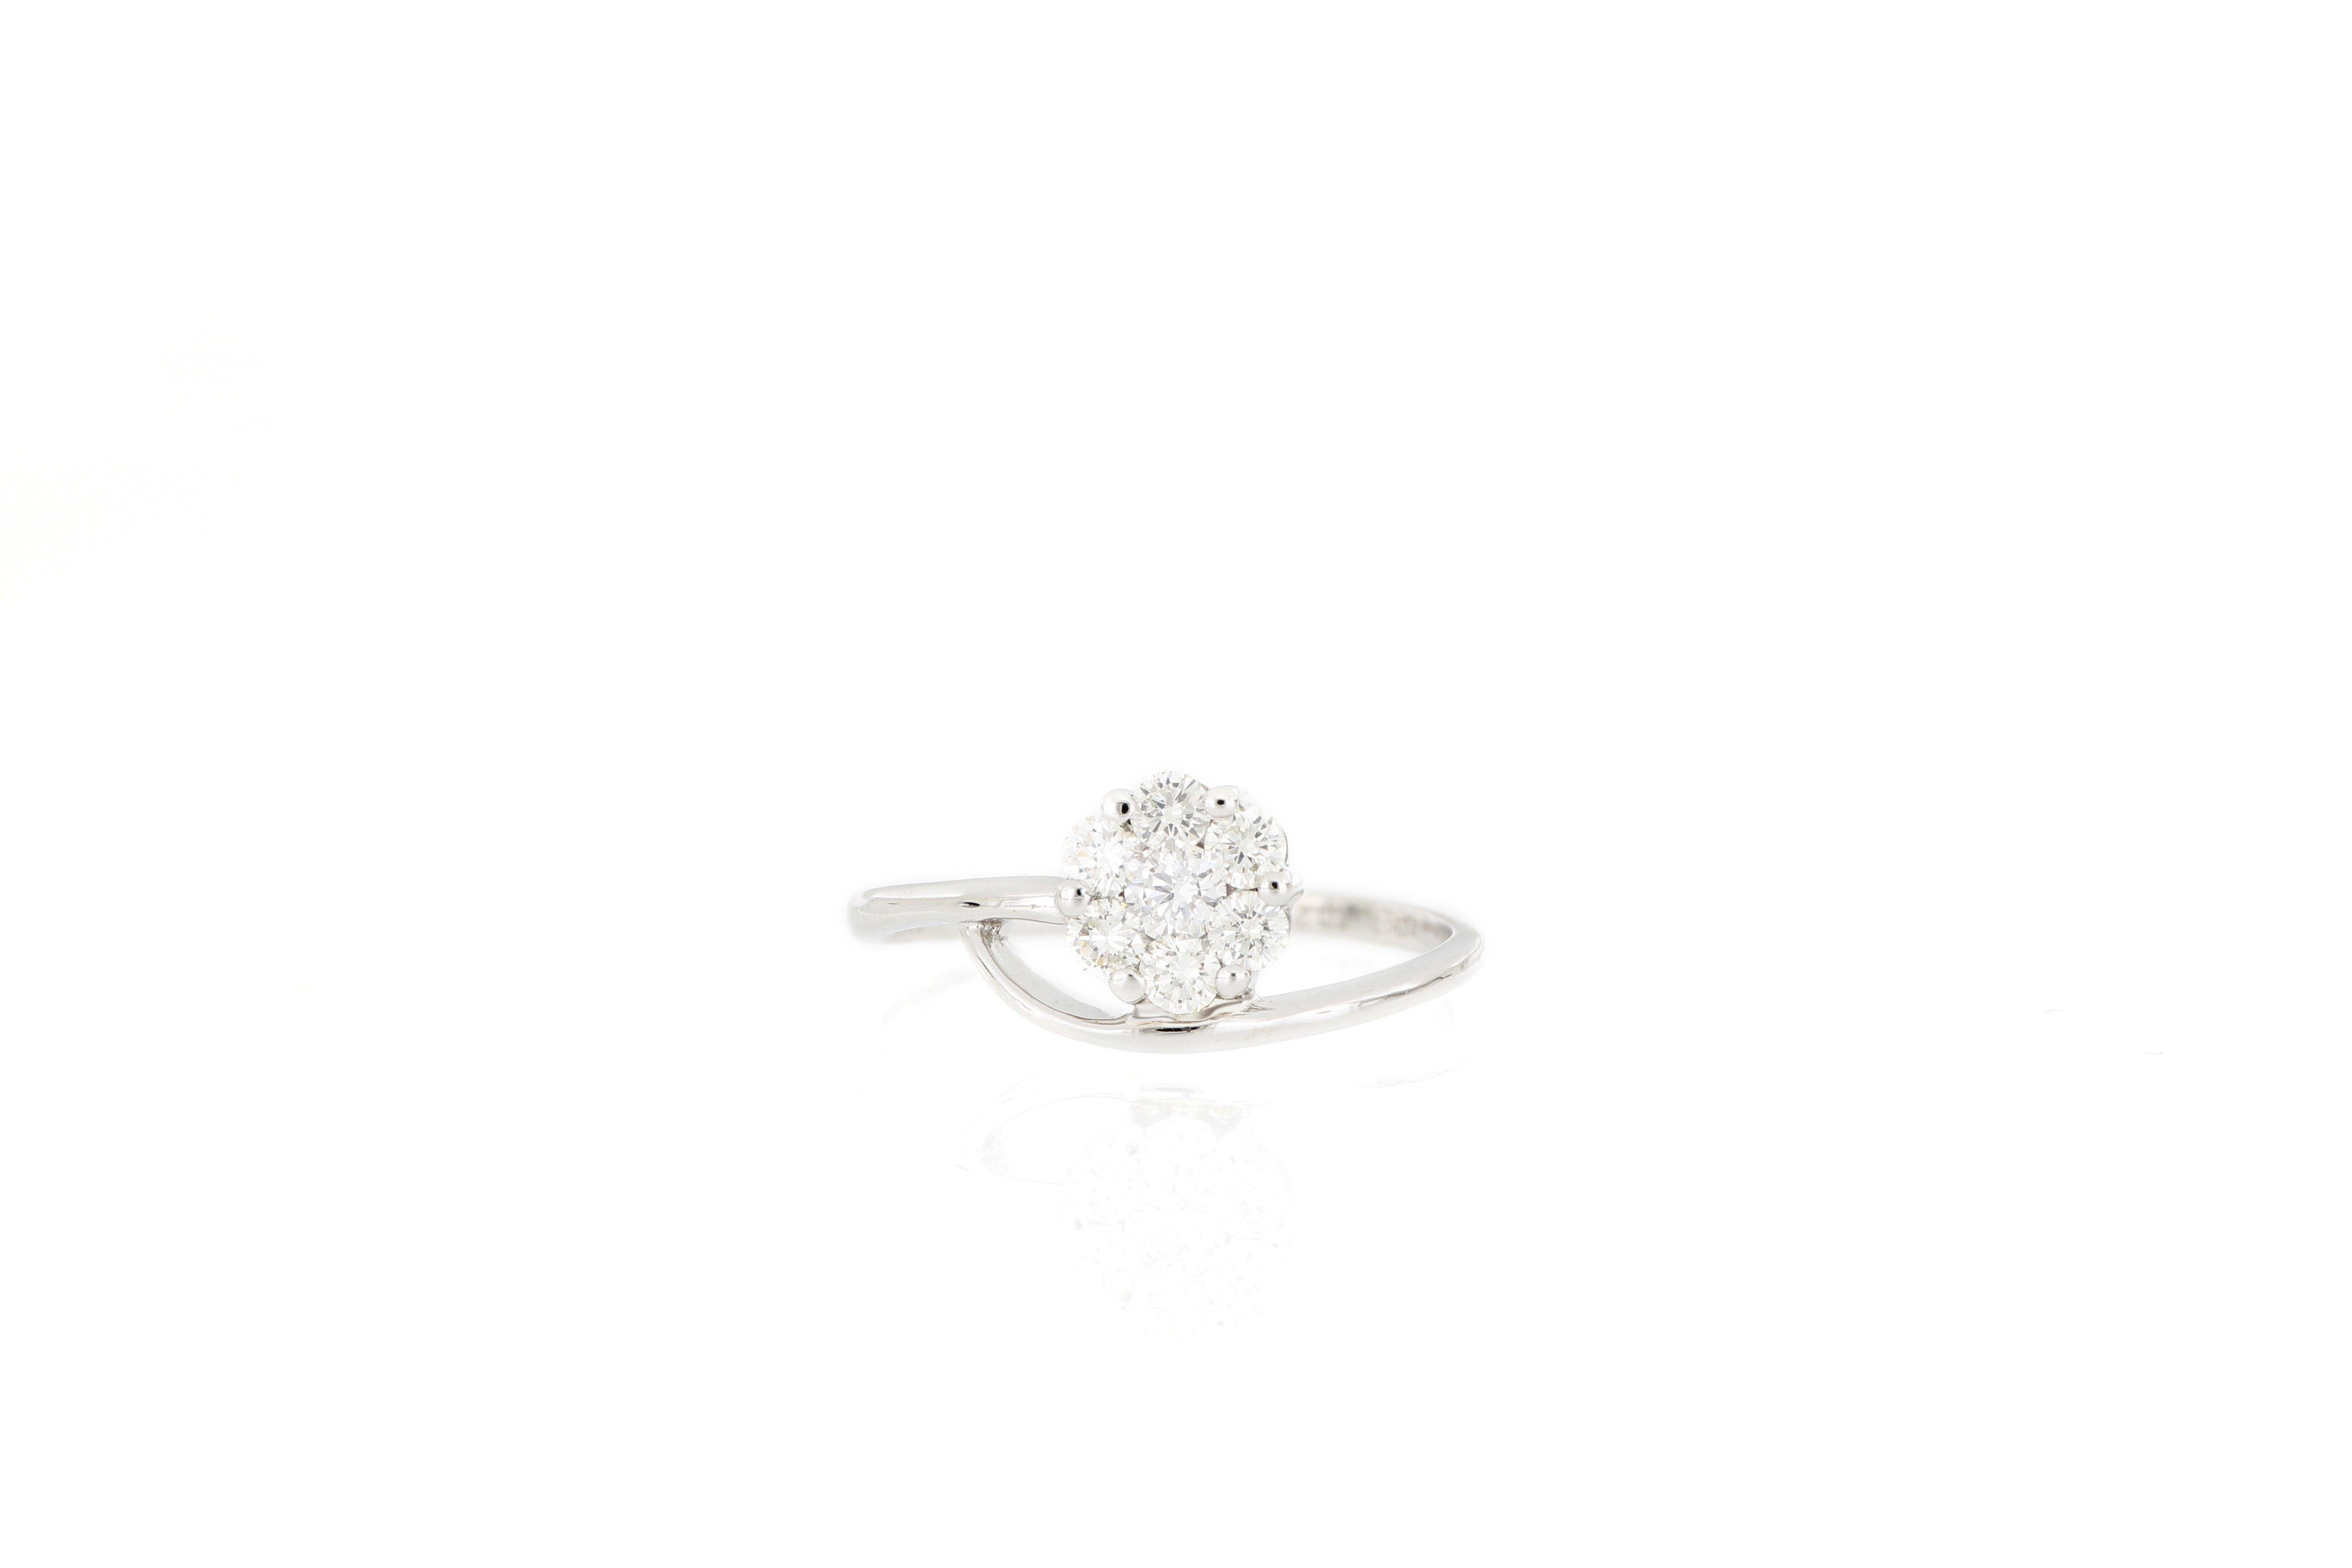 A diamond ring, set with brilliant-cut diamonds weighing 0.42 carats, mounted in 18 karat white gold. A  beautiful ring which can be worn for any occasion.
O’Che 1867 is renowned for its high jewellery collections with fabulous designs. Our designs